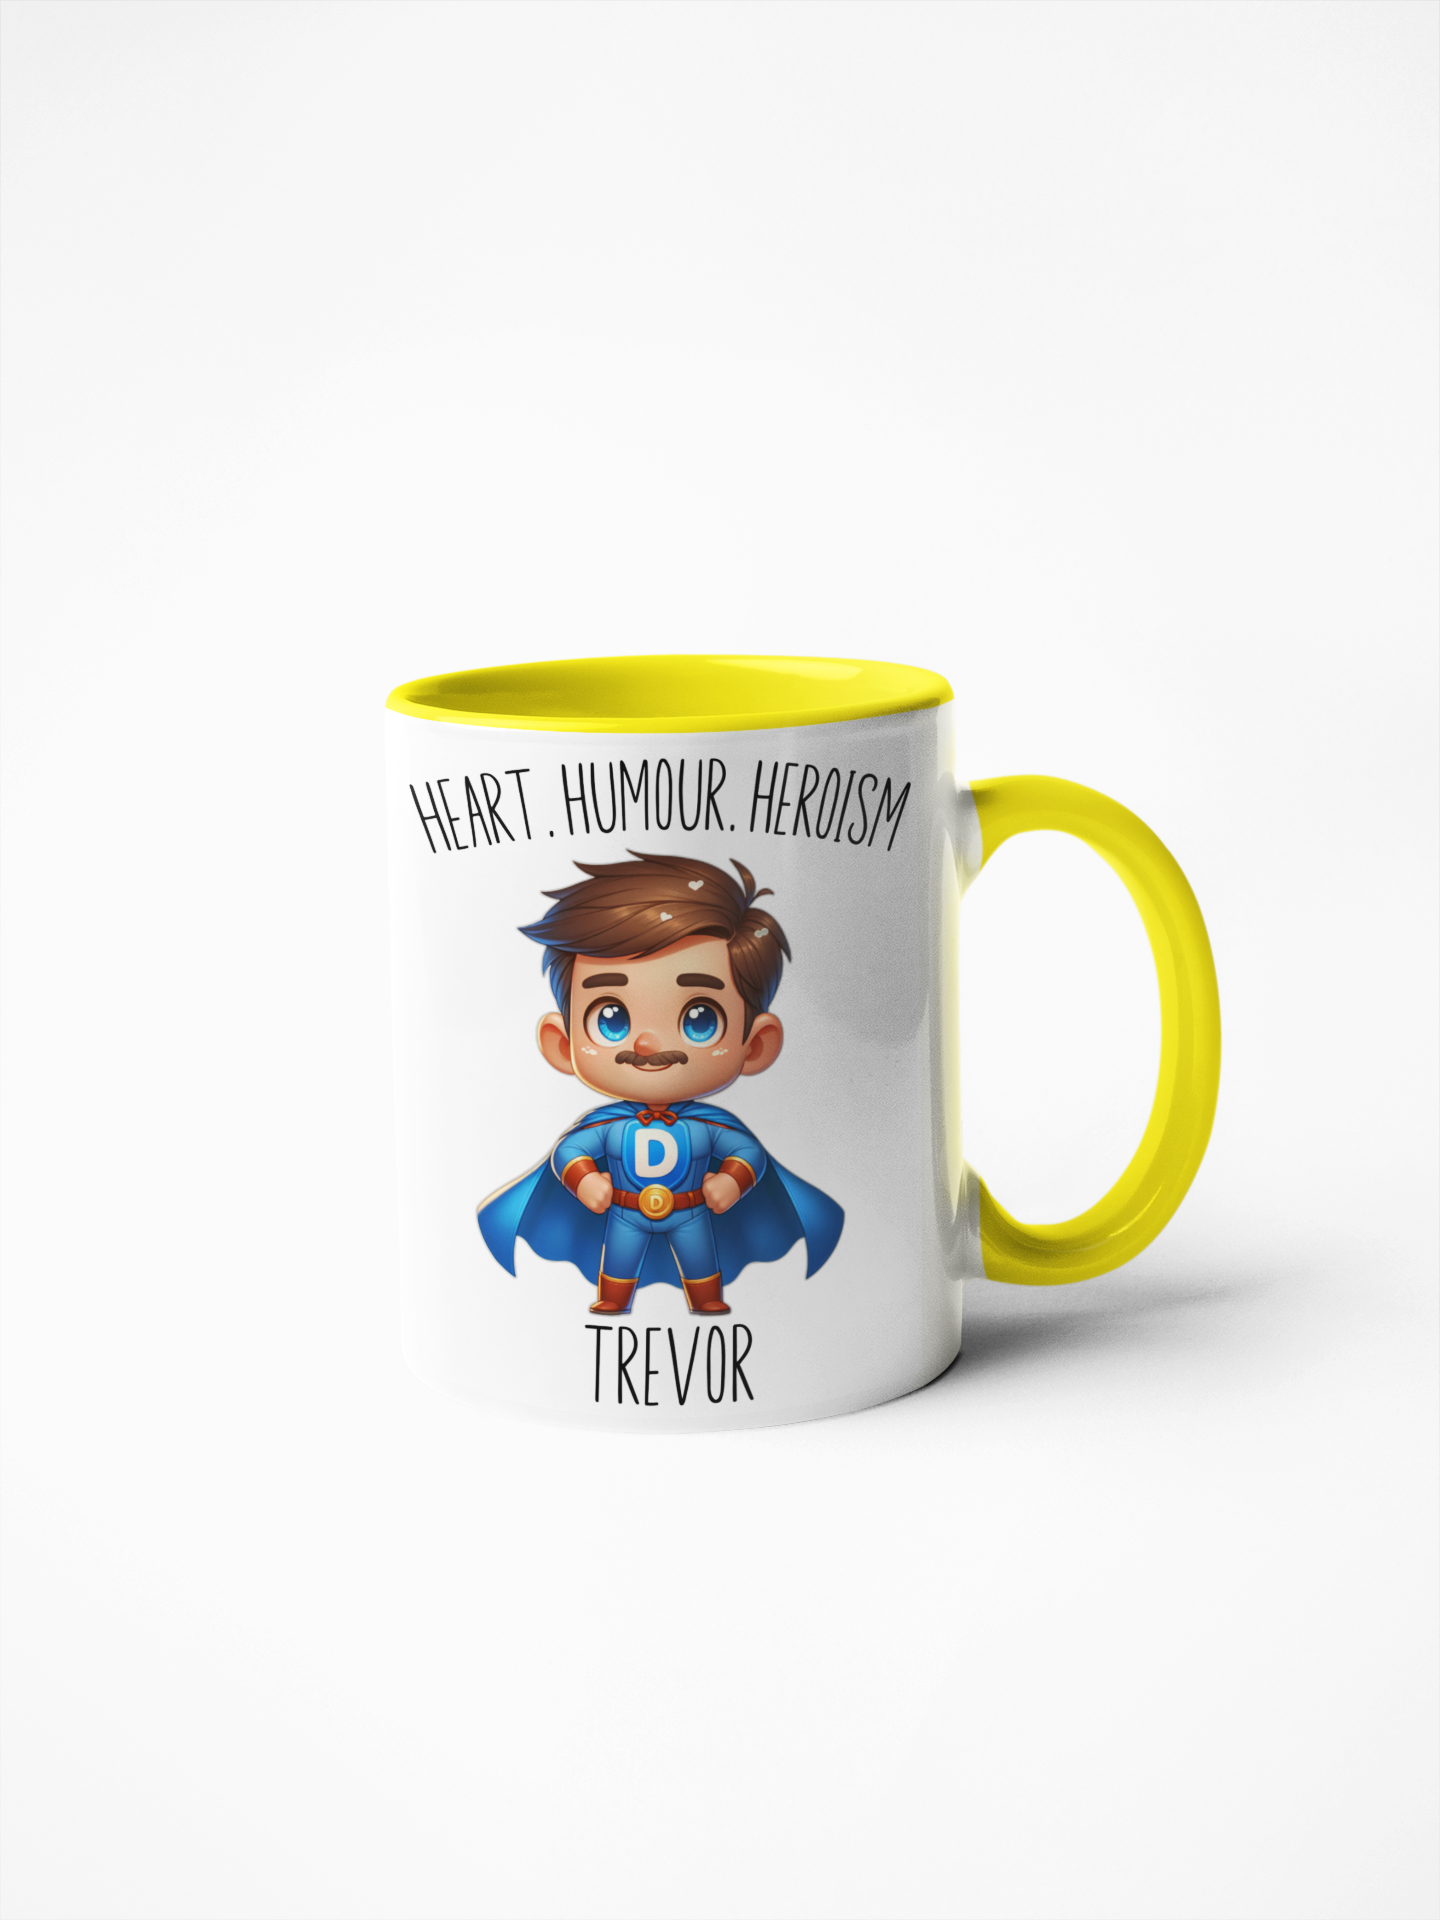 Super Dad Personalised Mug - Heroic Father's Day Gift, Customisable Name, Funny Mugs for Dads, Personalised Gifts for Him